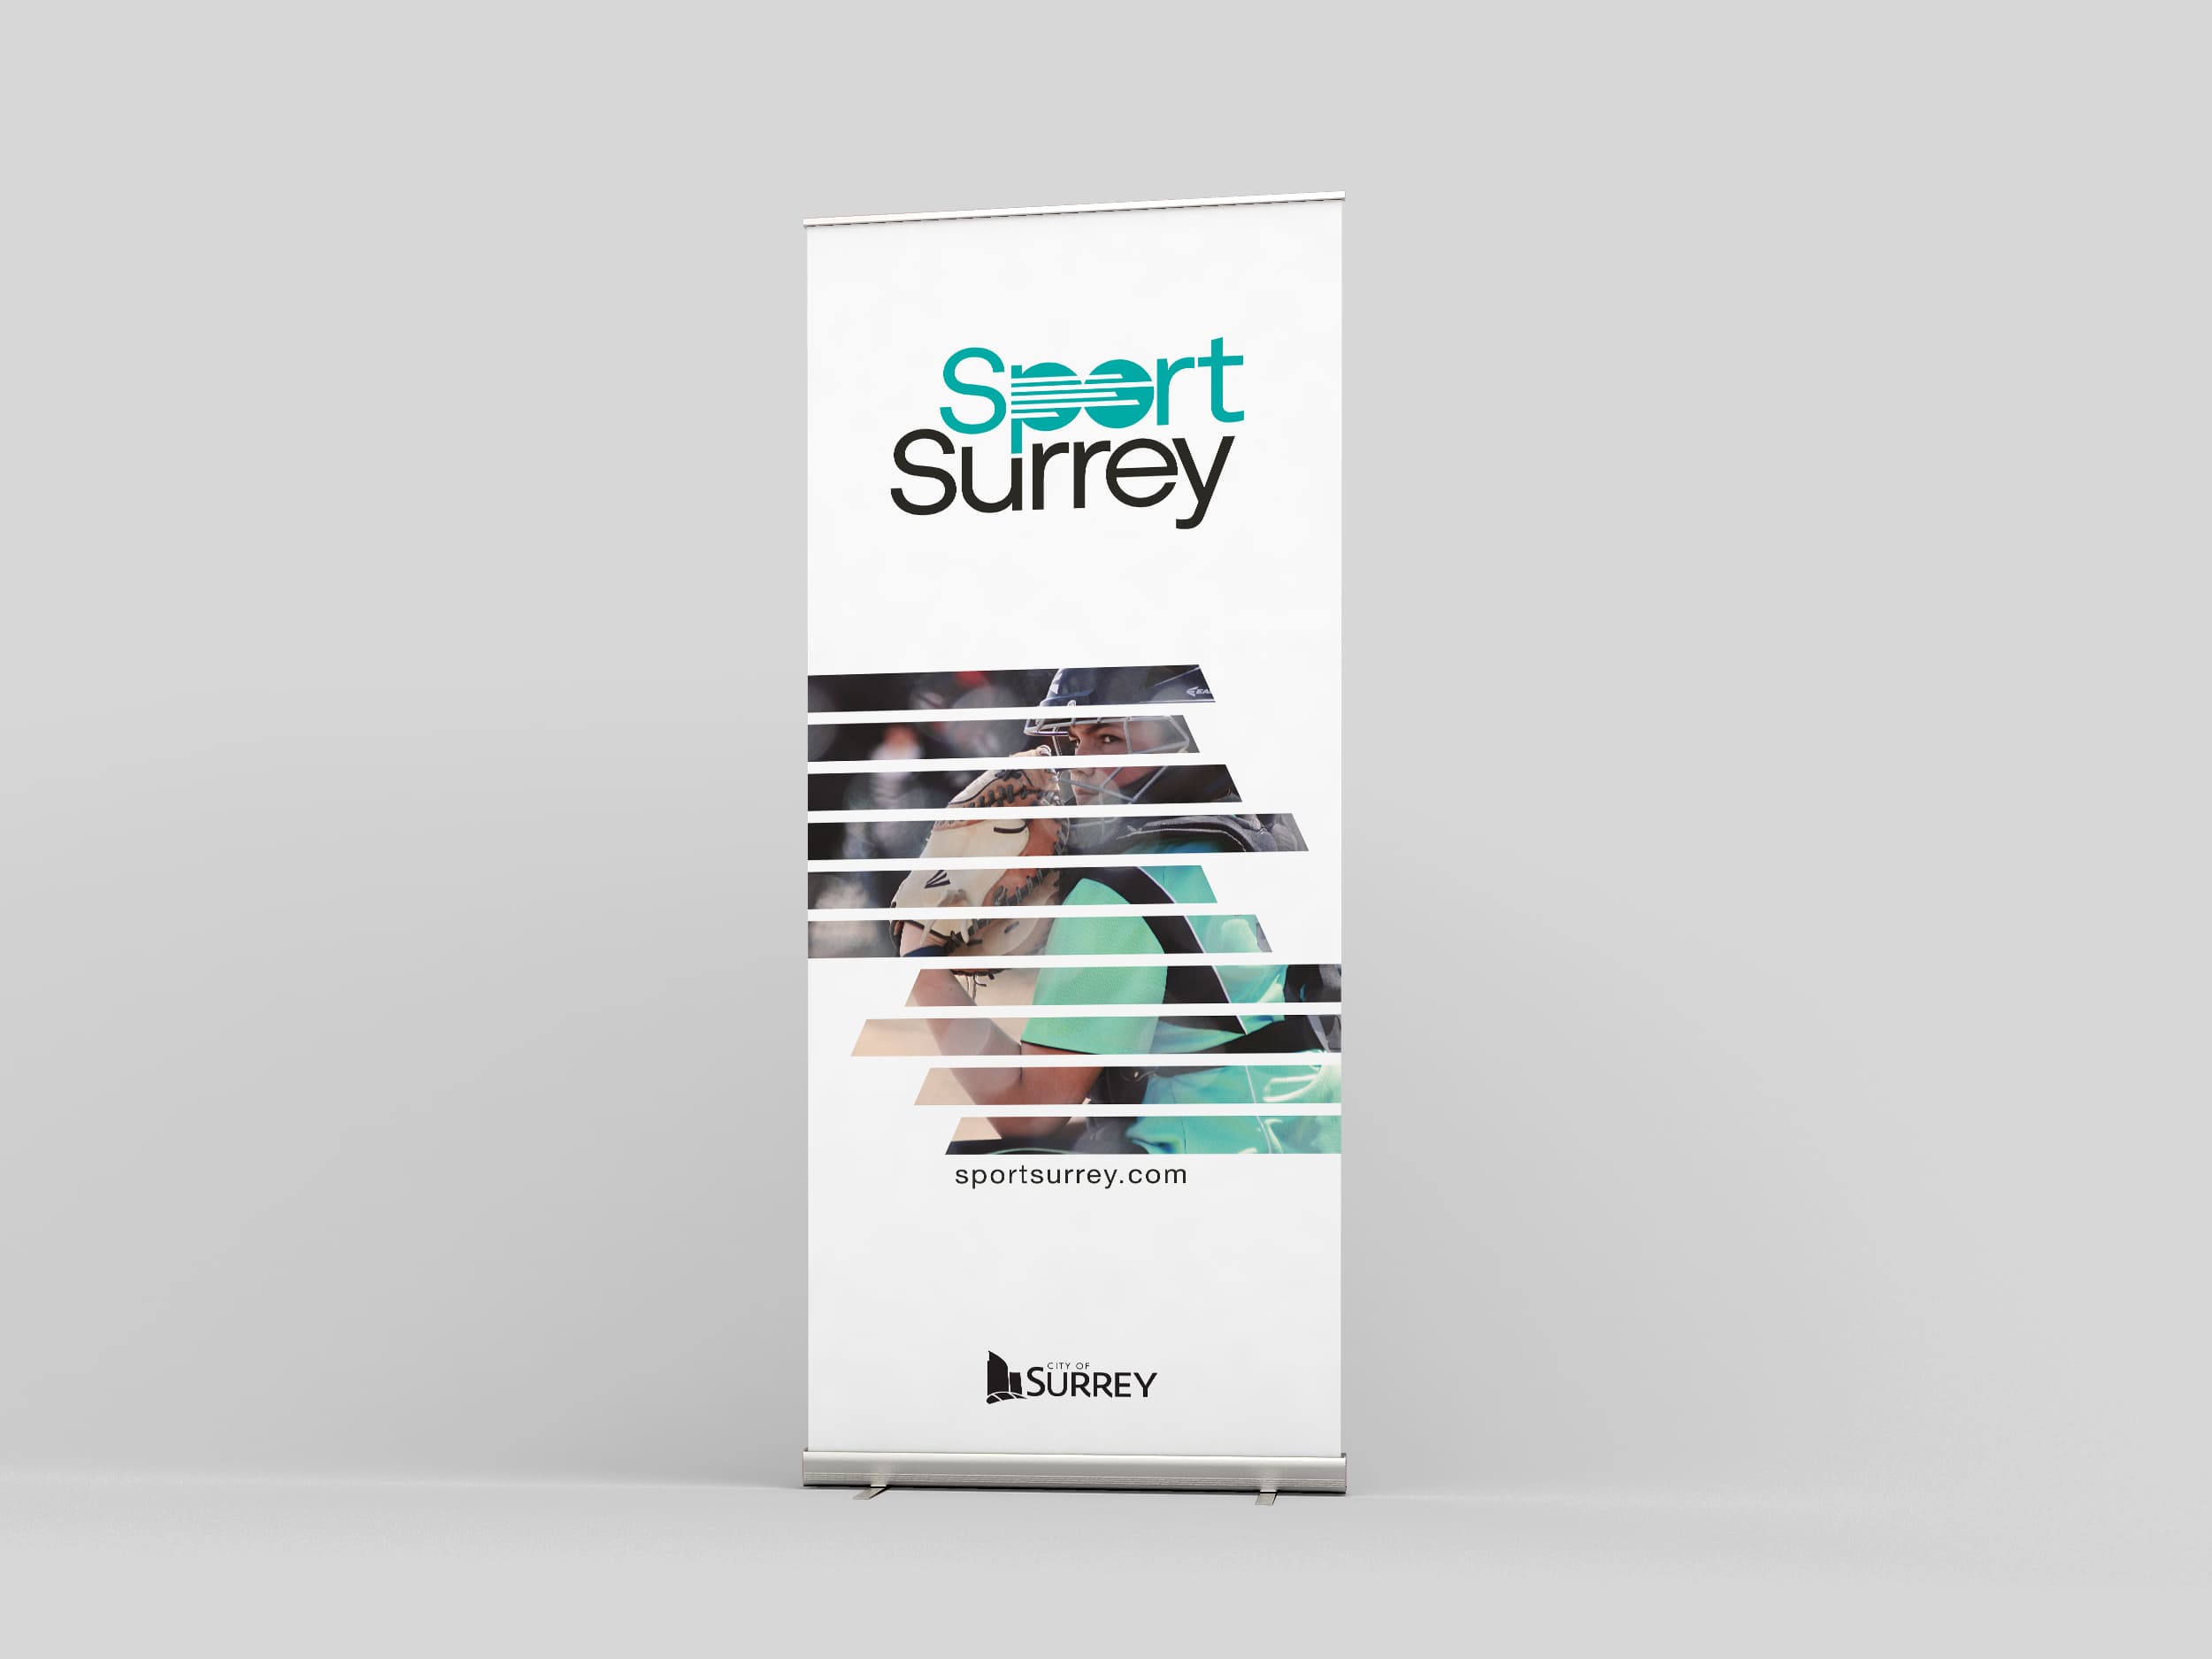 Sport Surrey's mock-cover of a white brochure, featuring refreshed logo